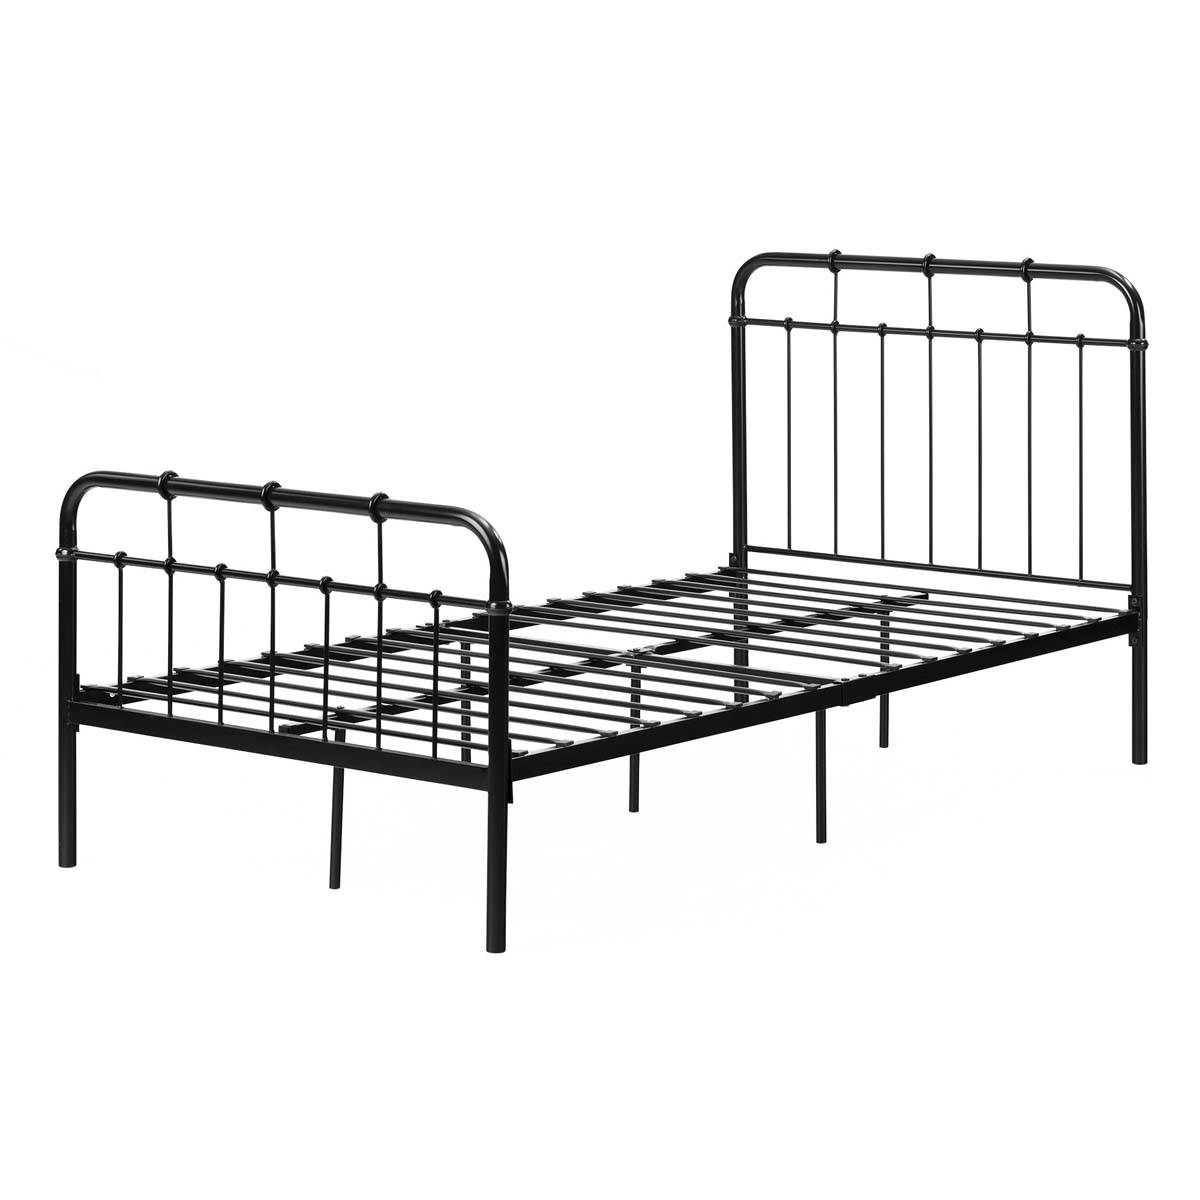 South Shore Tassio Pure Black Twin Metal Complete Bed Frame